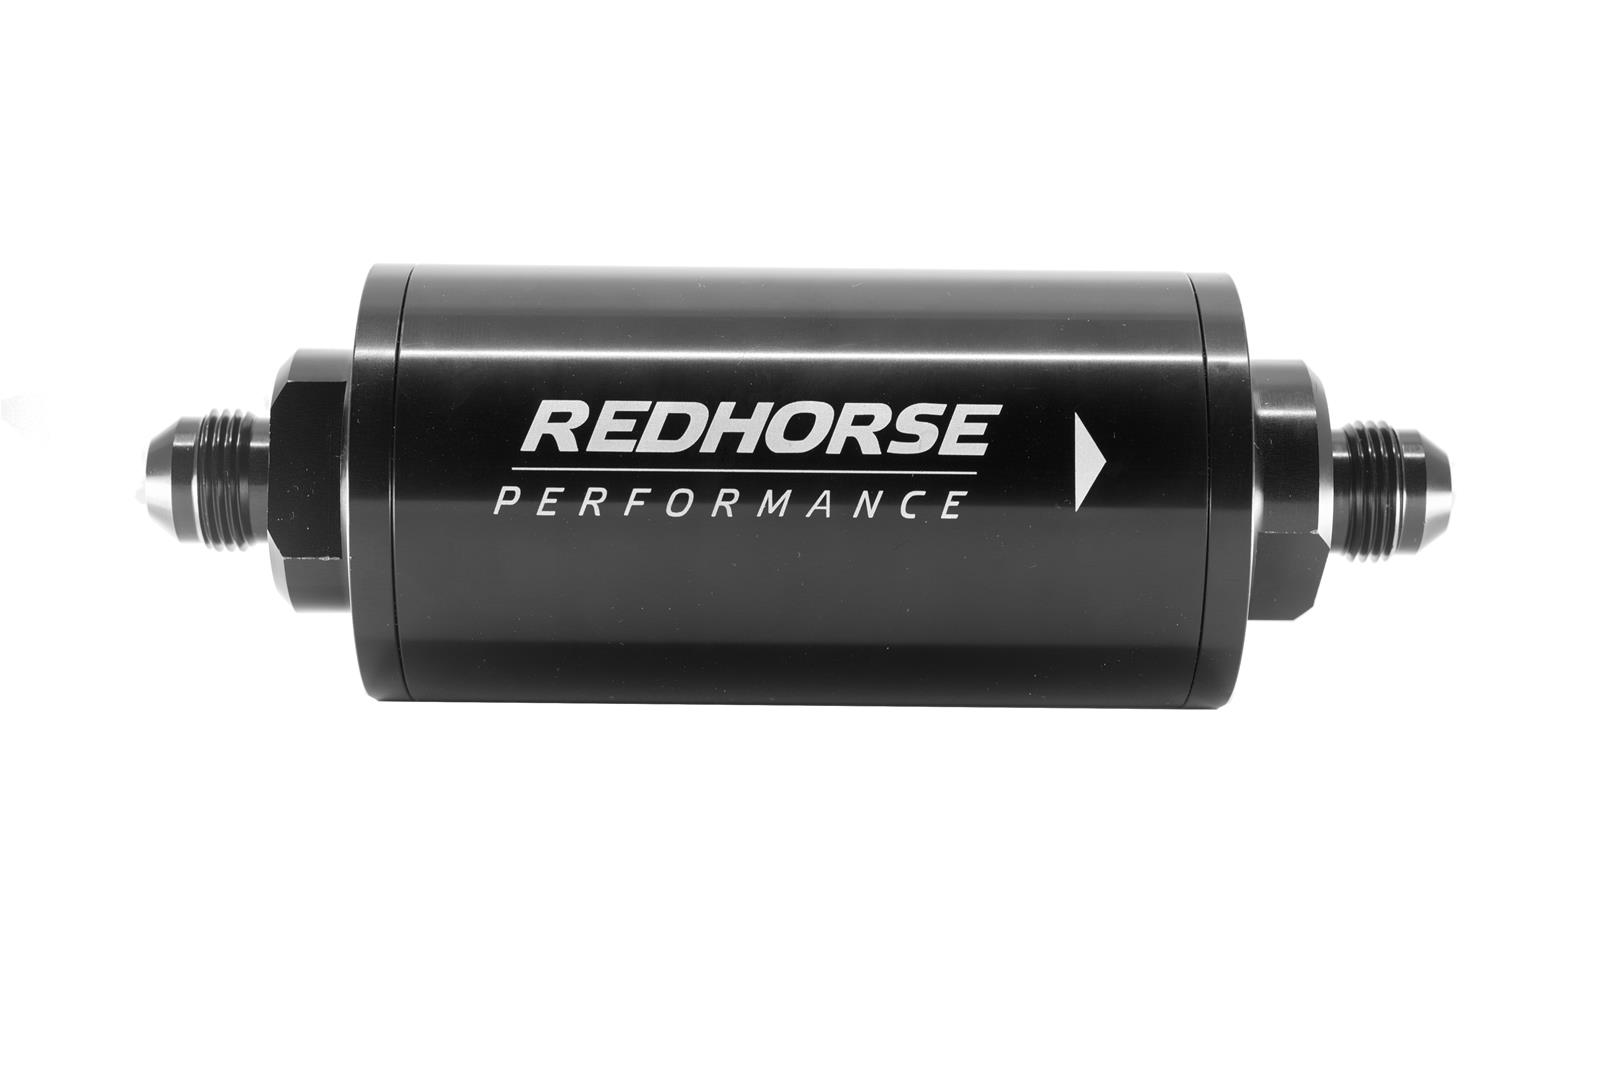 Redhorse Performance 4651-08-2-12 6in Cylindrical In-Line Race Fuel Filter w/ 12 Micron Fiberglass element - 08 AN